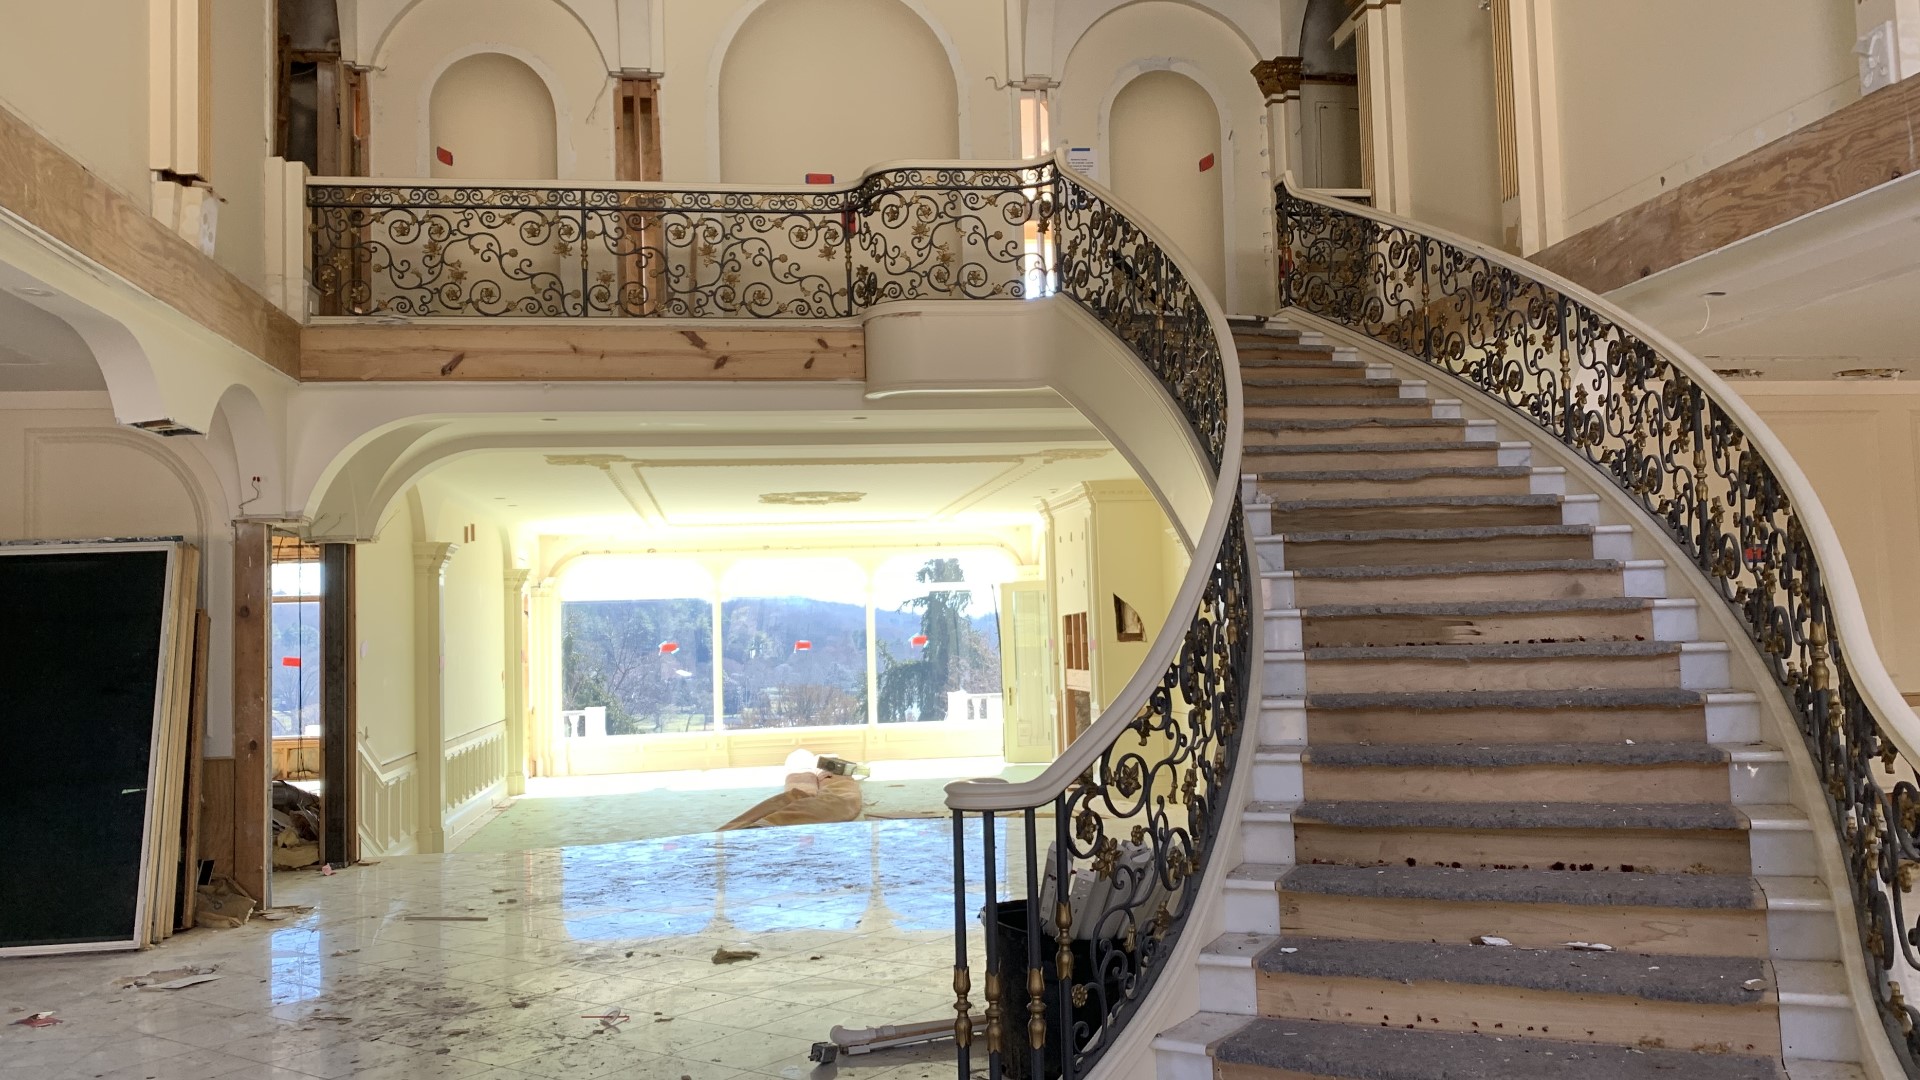 What was once Knoxville's biggest mansion is today just a shell of itself. Villa Collina has been gutted, and soon it will be brought to the ground.